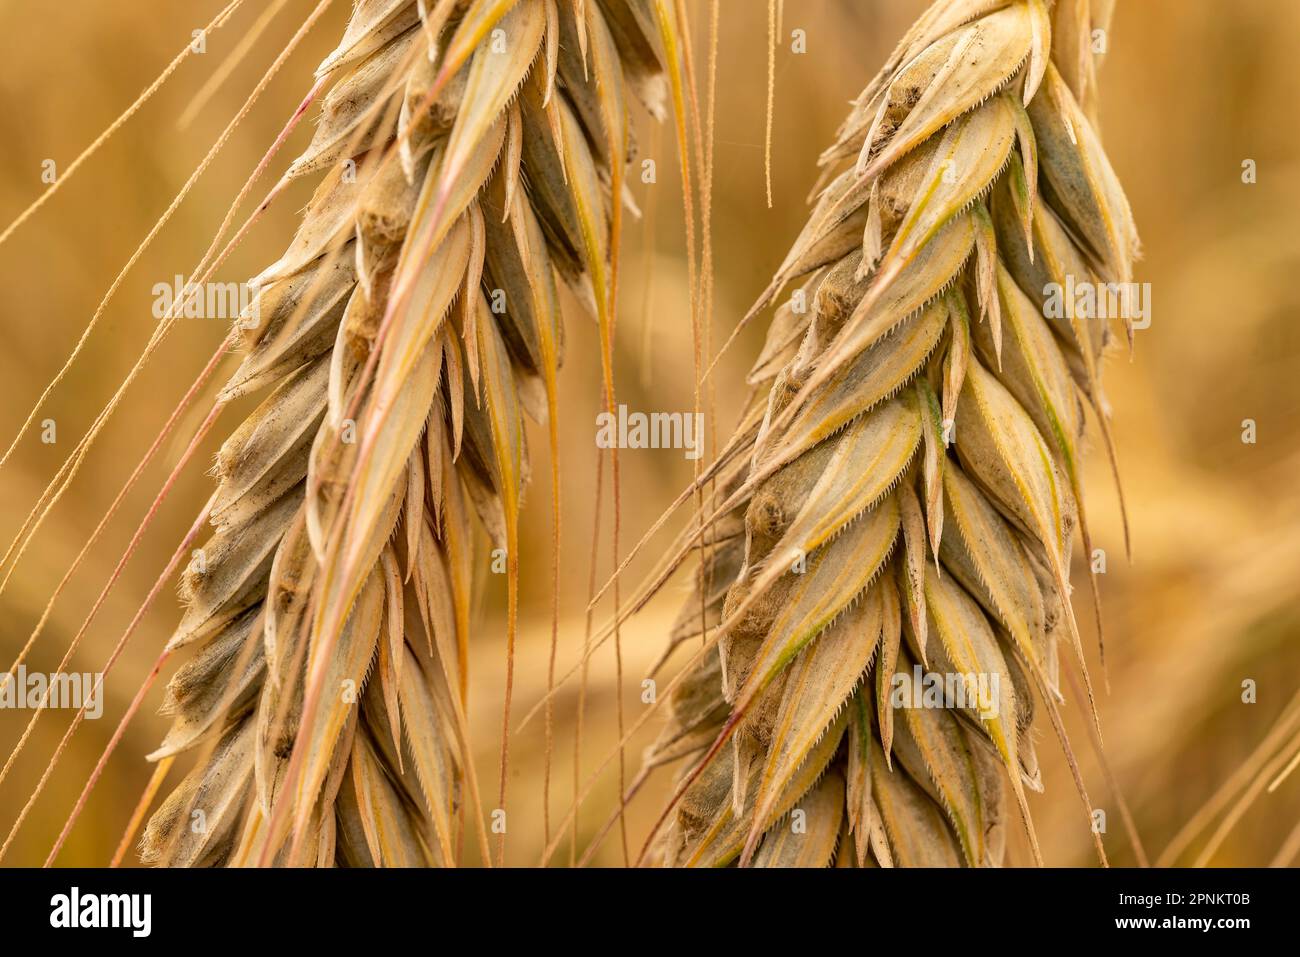 Macro shot of wheat ears in front of a golden wheat fieldMacro shot of wheat ears in front of a golden wheat field Stock Photo